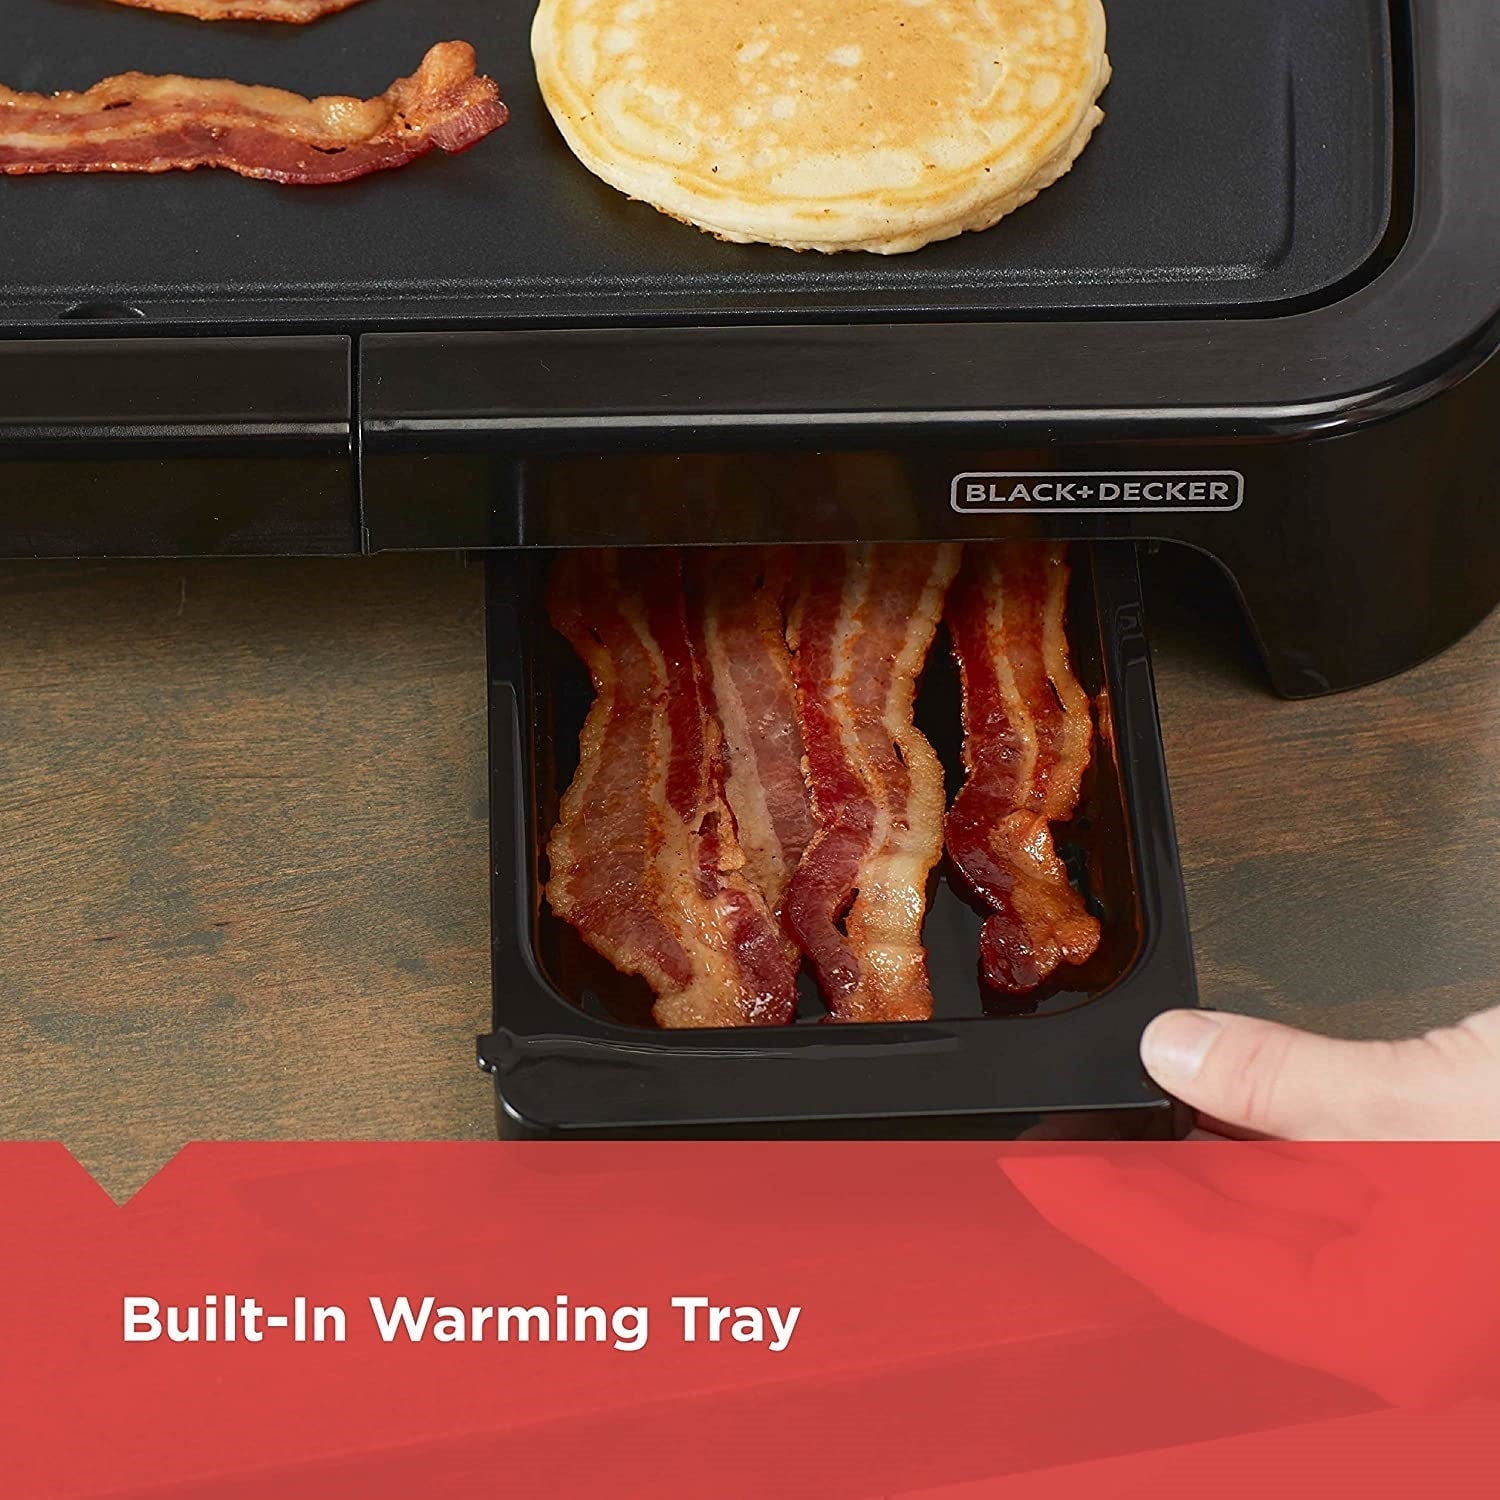 Black & Decker family-sized electric griddle for $14 - Clark Deals